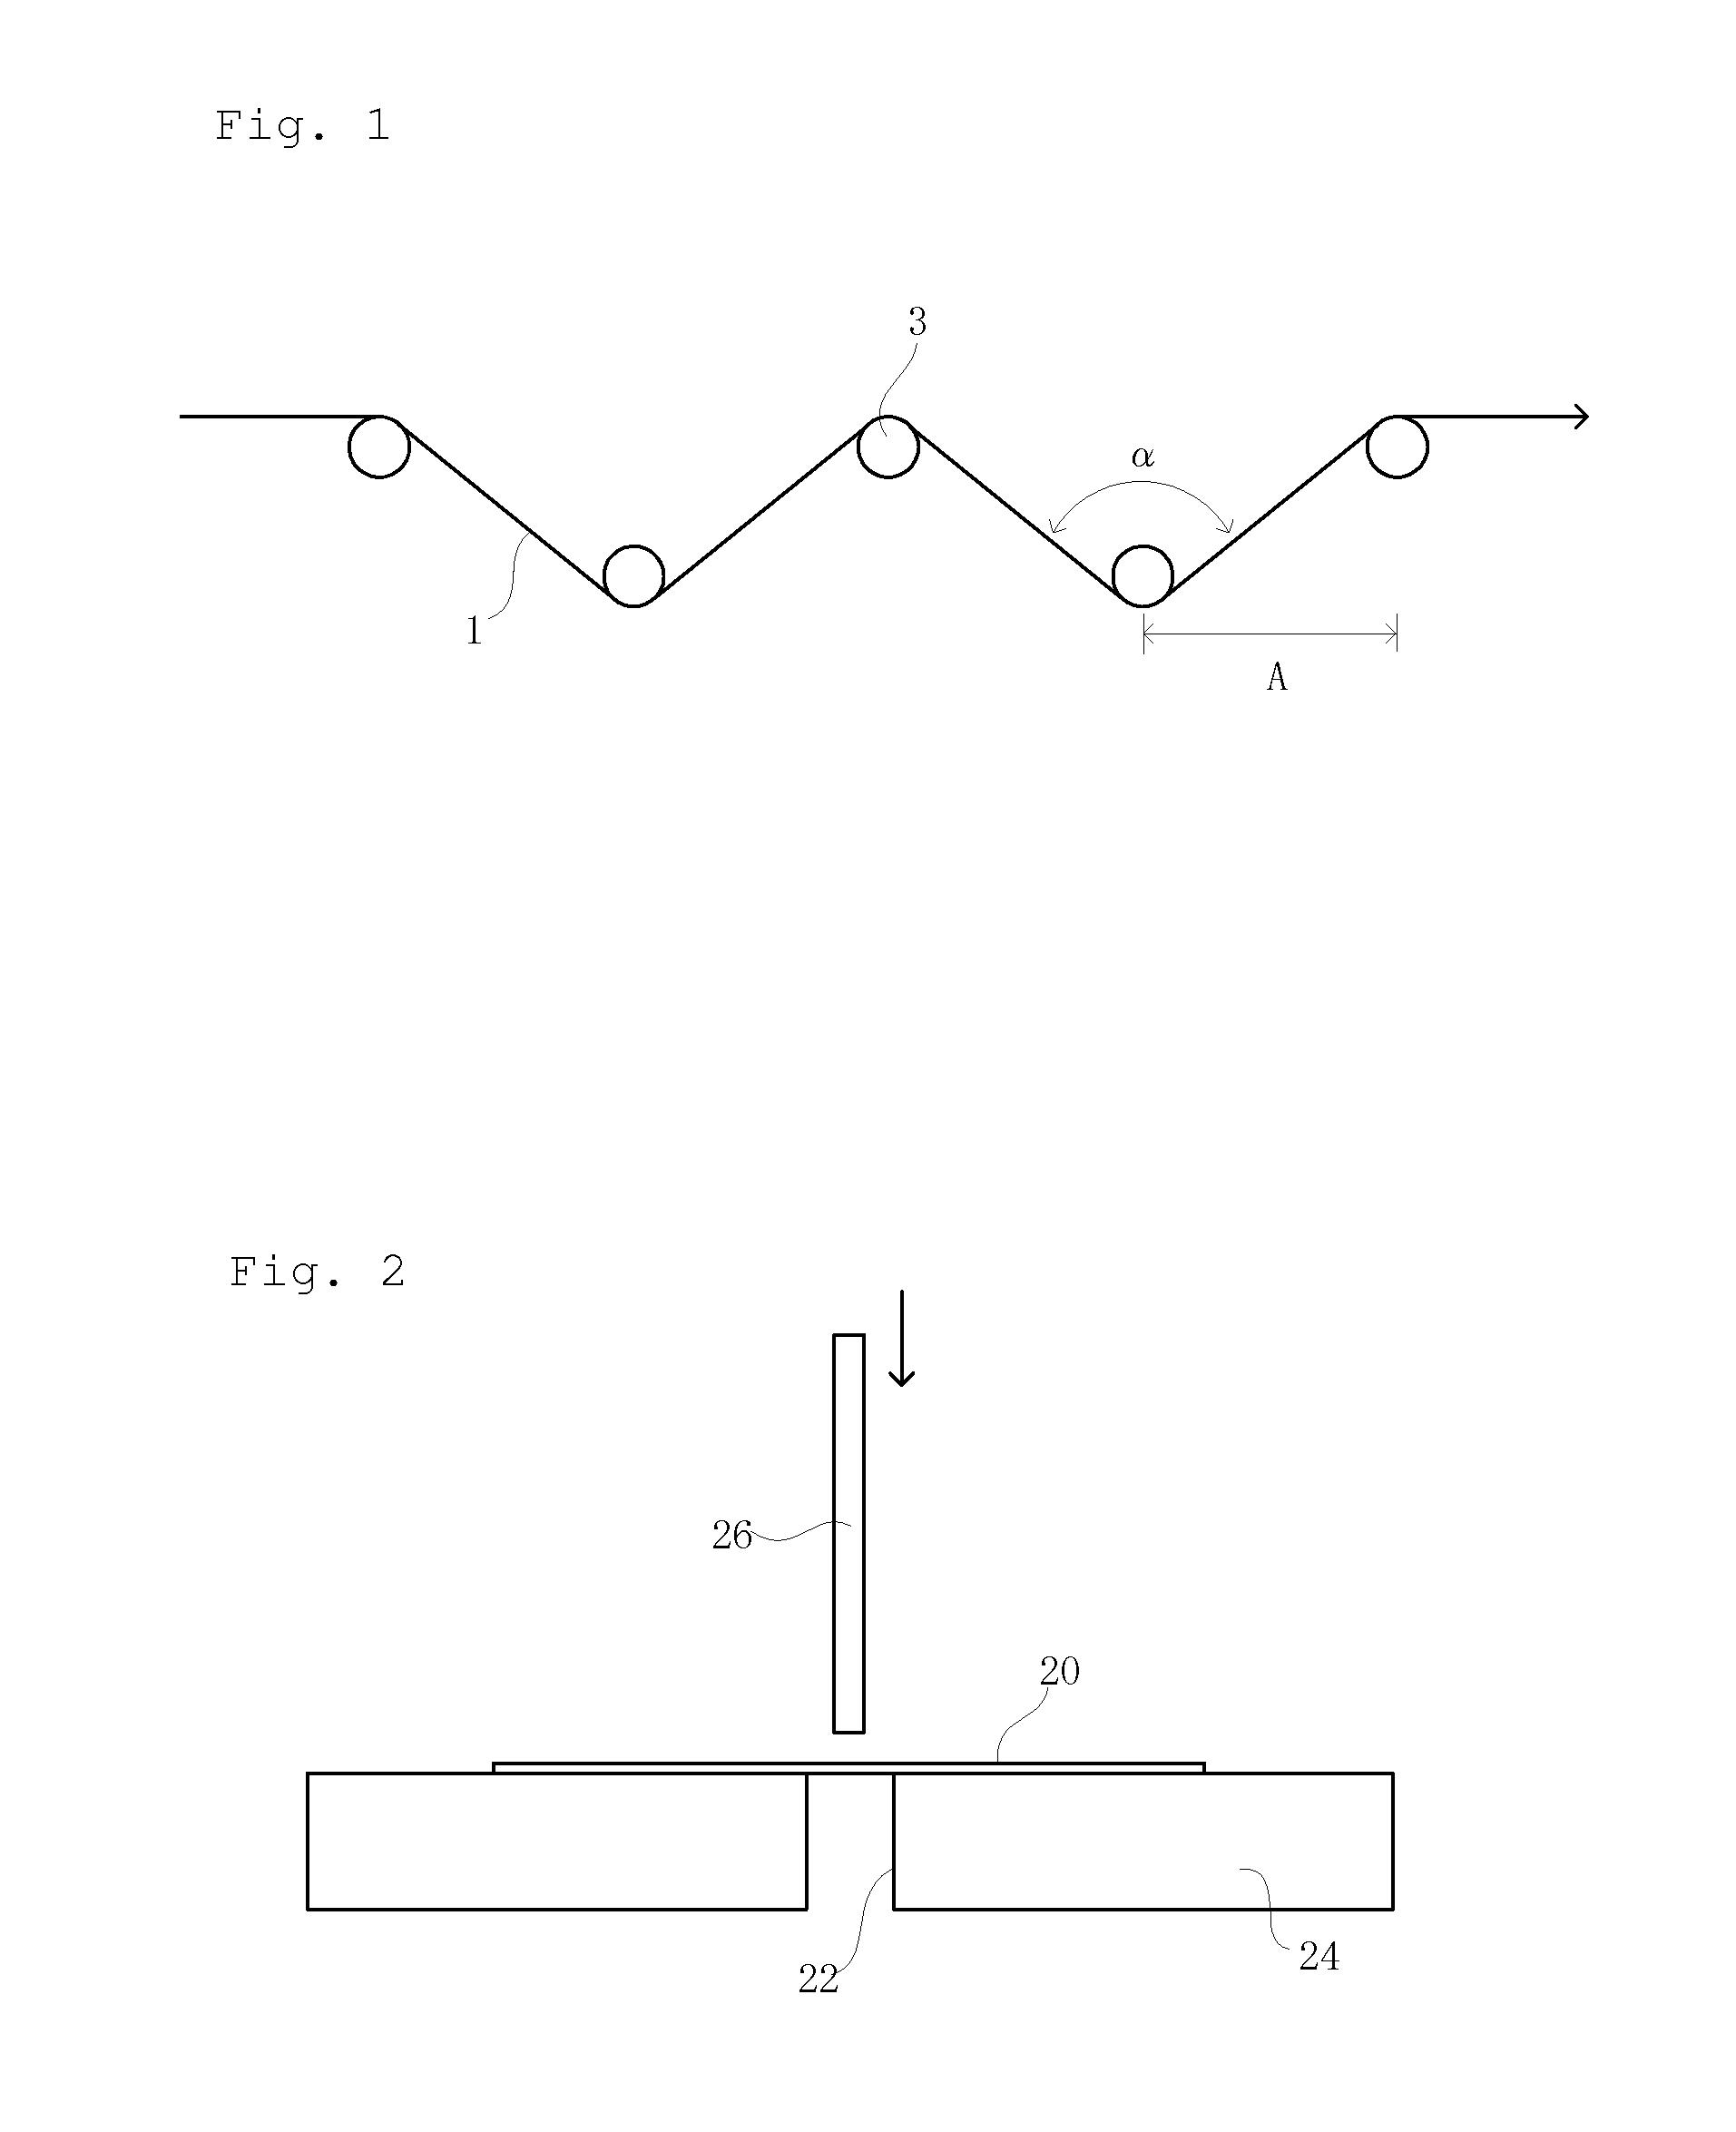 Carbon Fiber Strand for Reinforcing Thermoplastic Resins and Method of Producing the Same